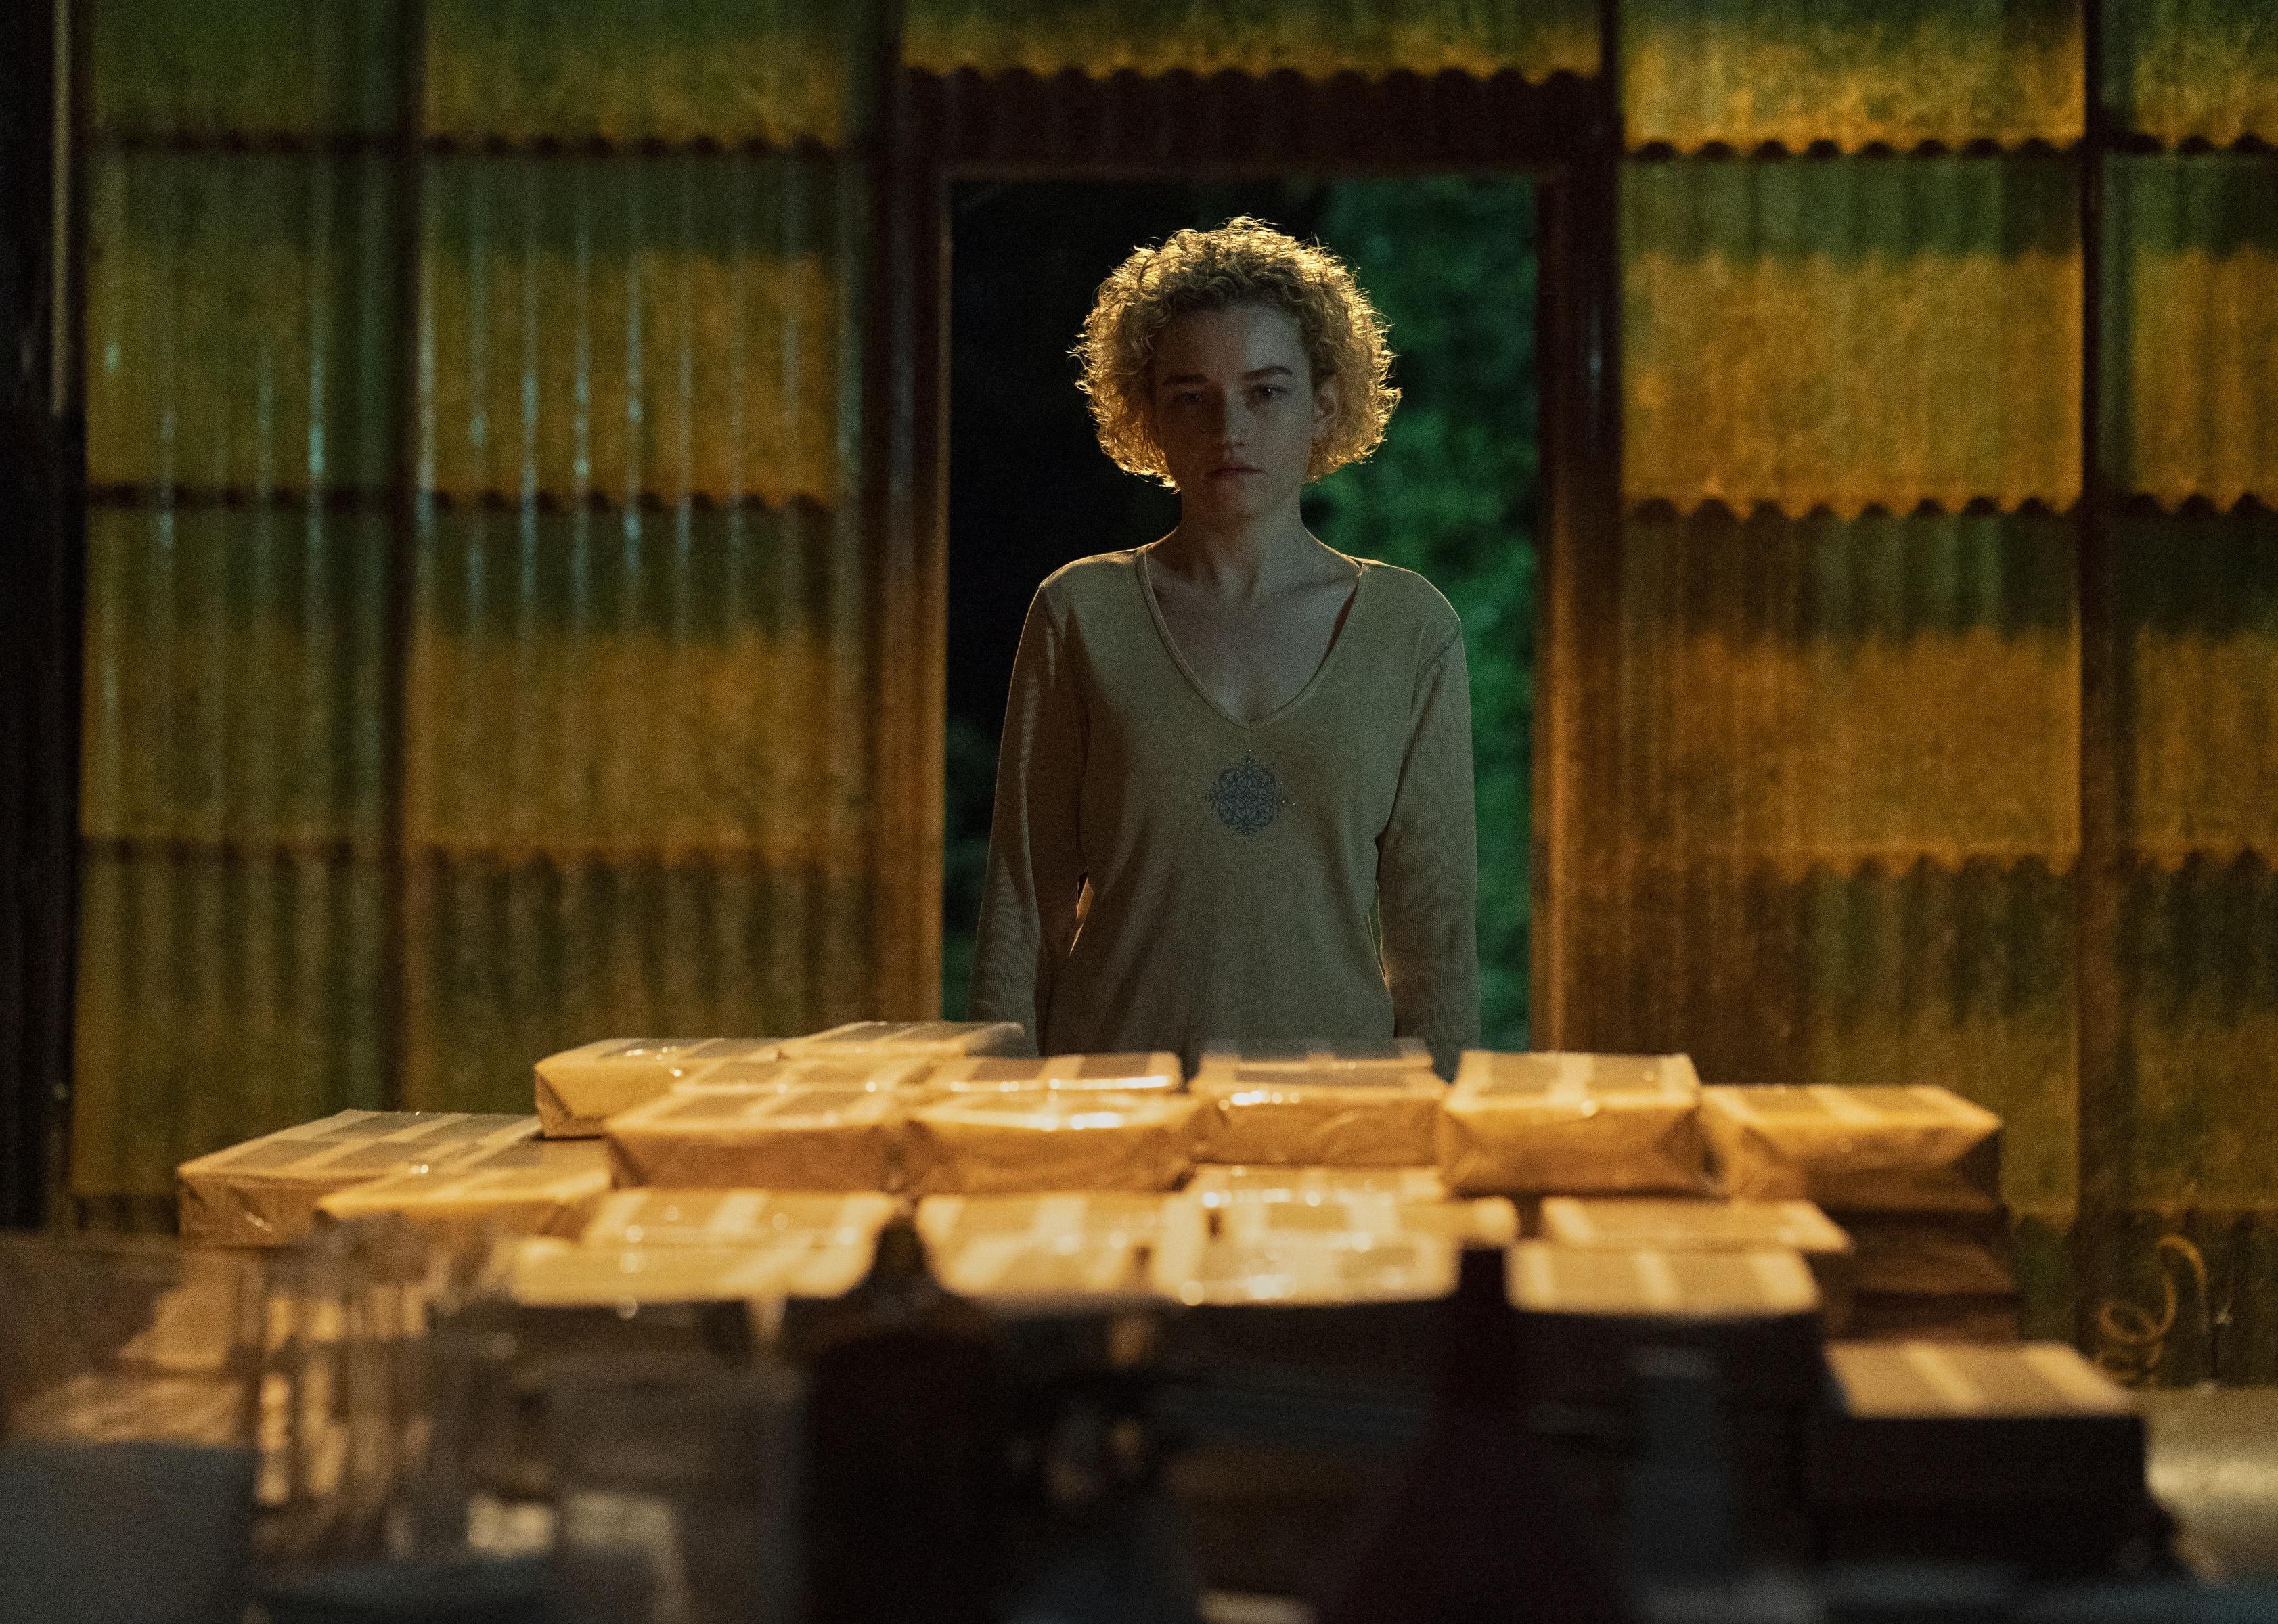 Julia Garner in a room looking at stacks of something wrapped in paper.